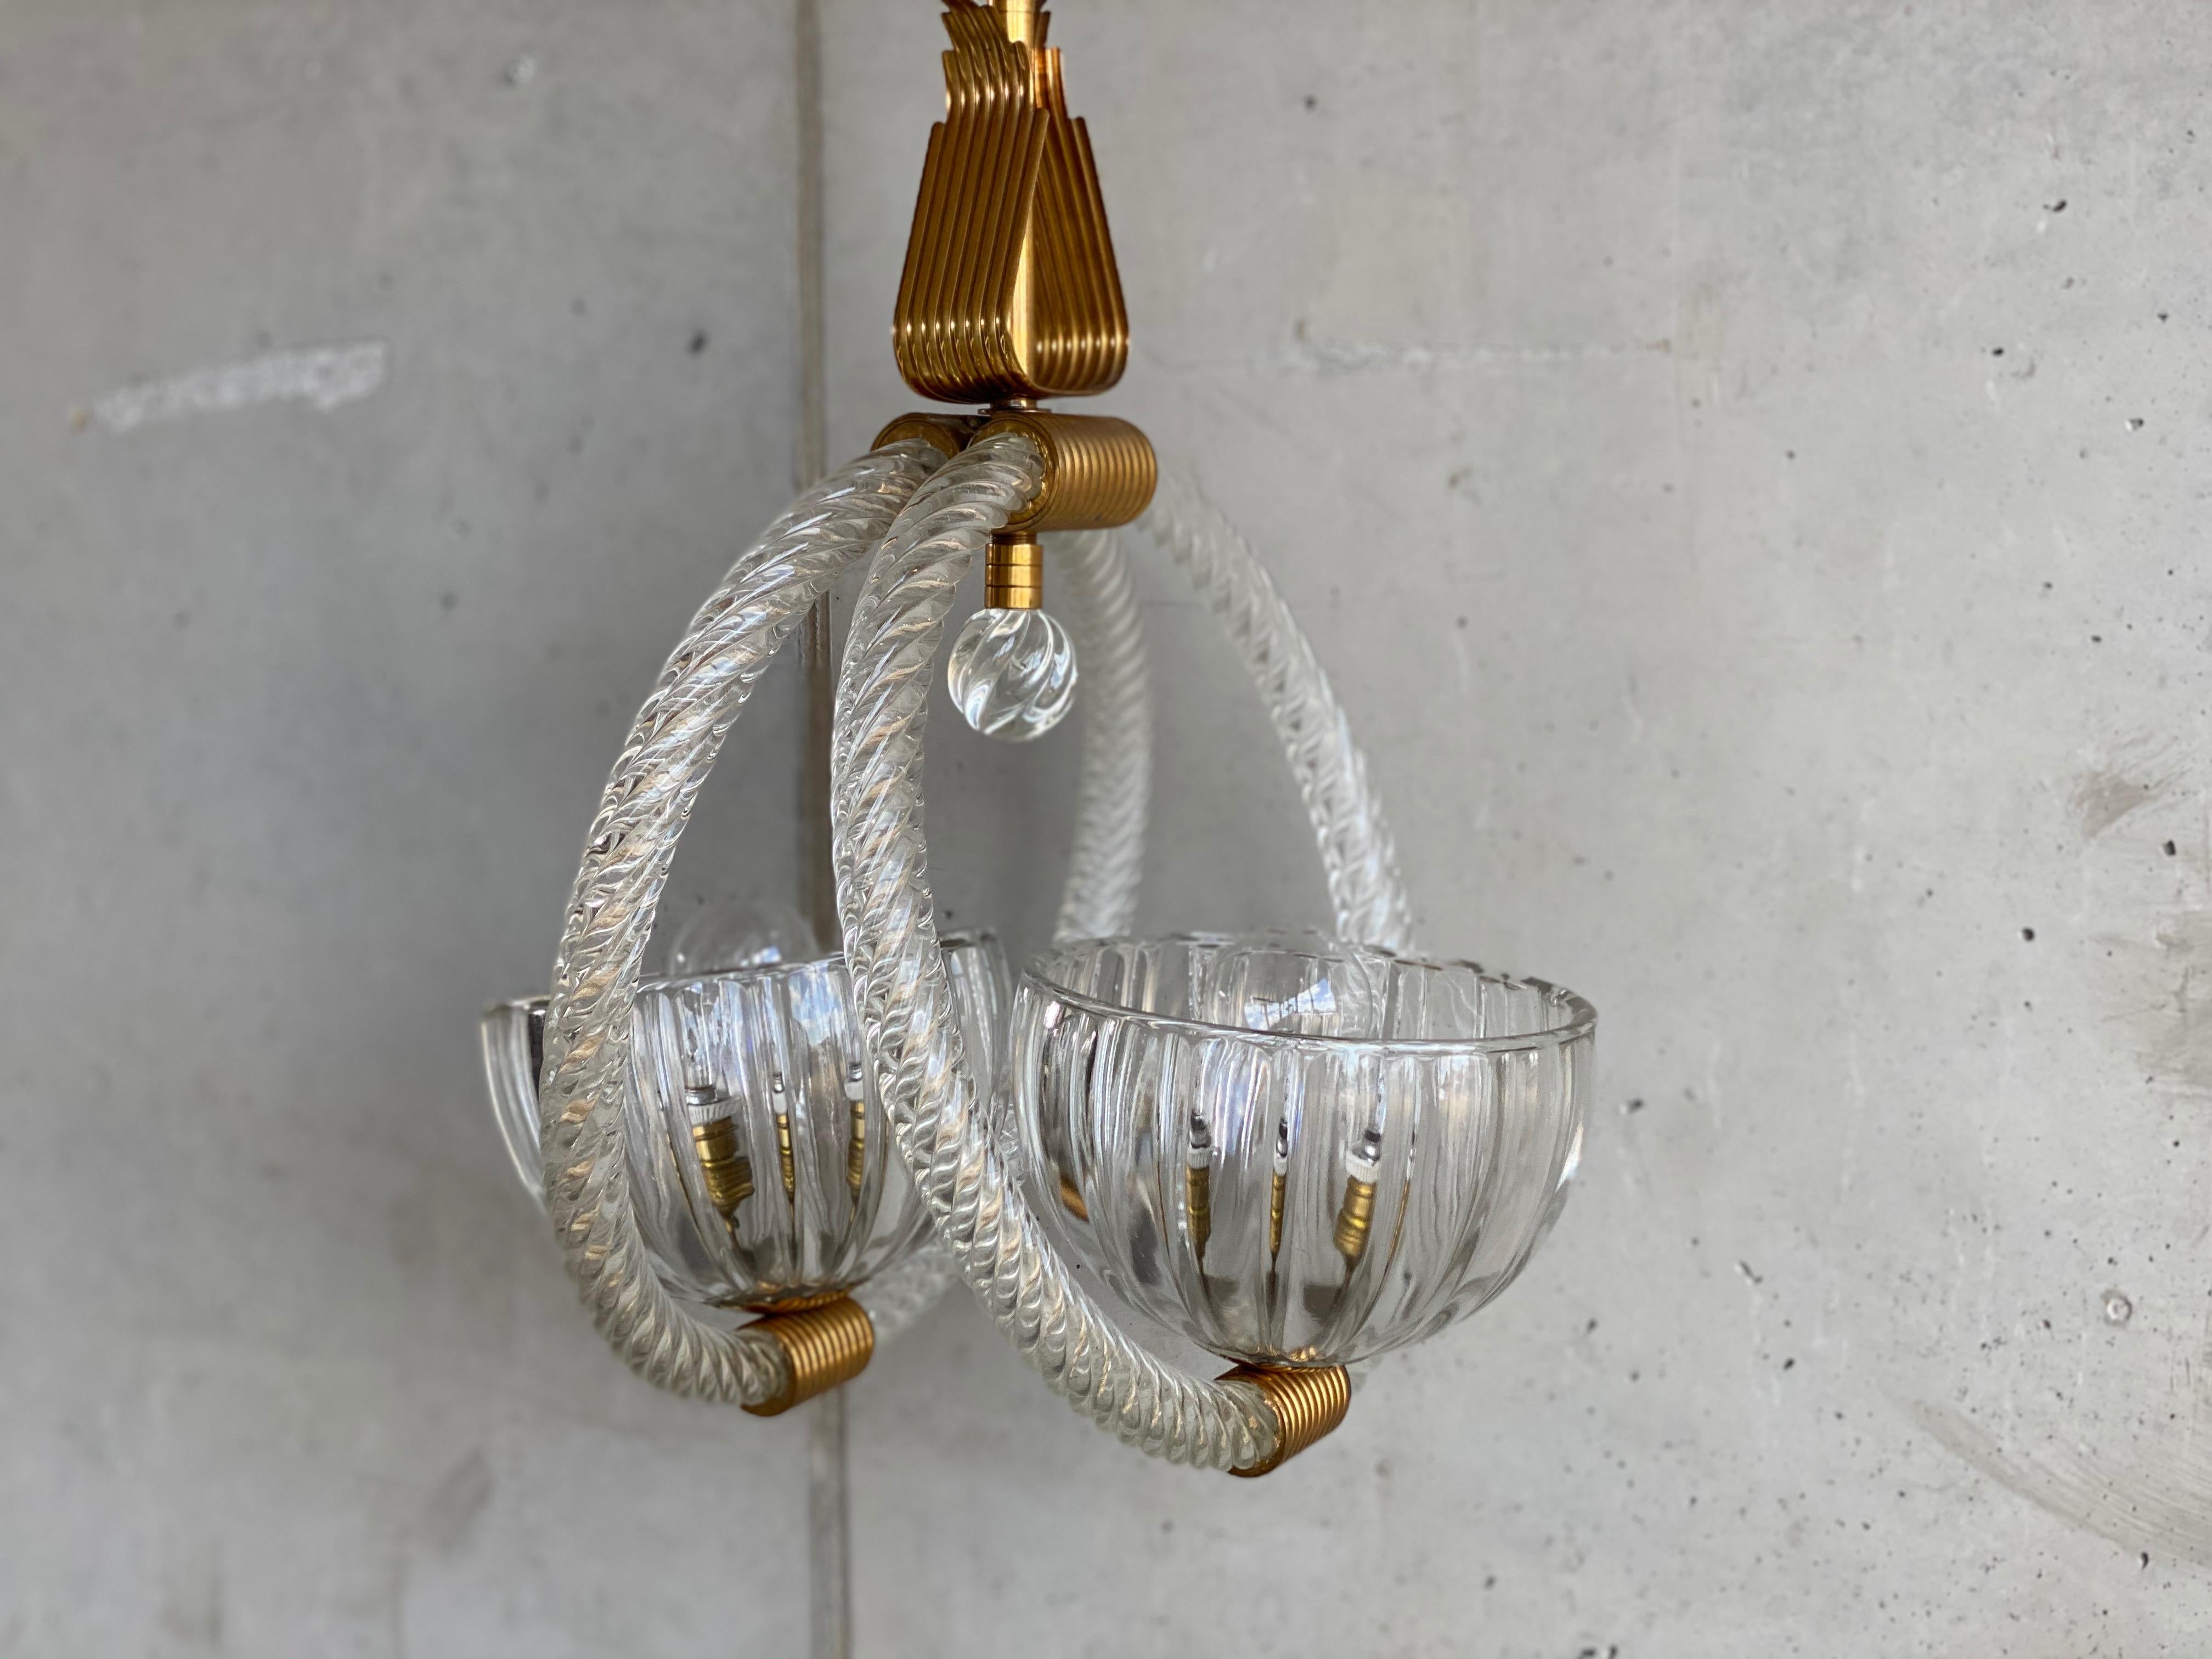 Art Deco Murano Glas Pendant Lamp by Barovier & Toso, 1930s with brass In Good Condition For Sale In Hamburg, DE